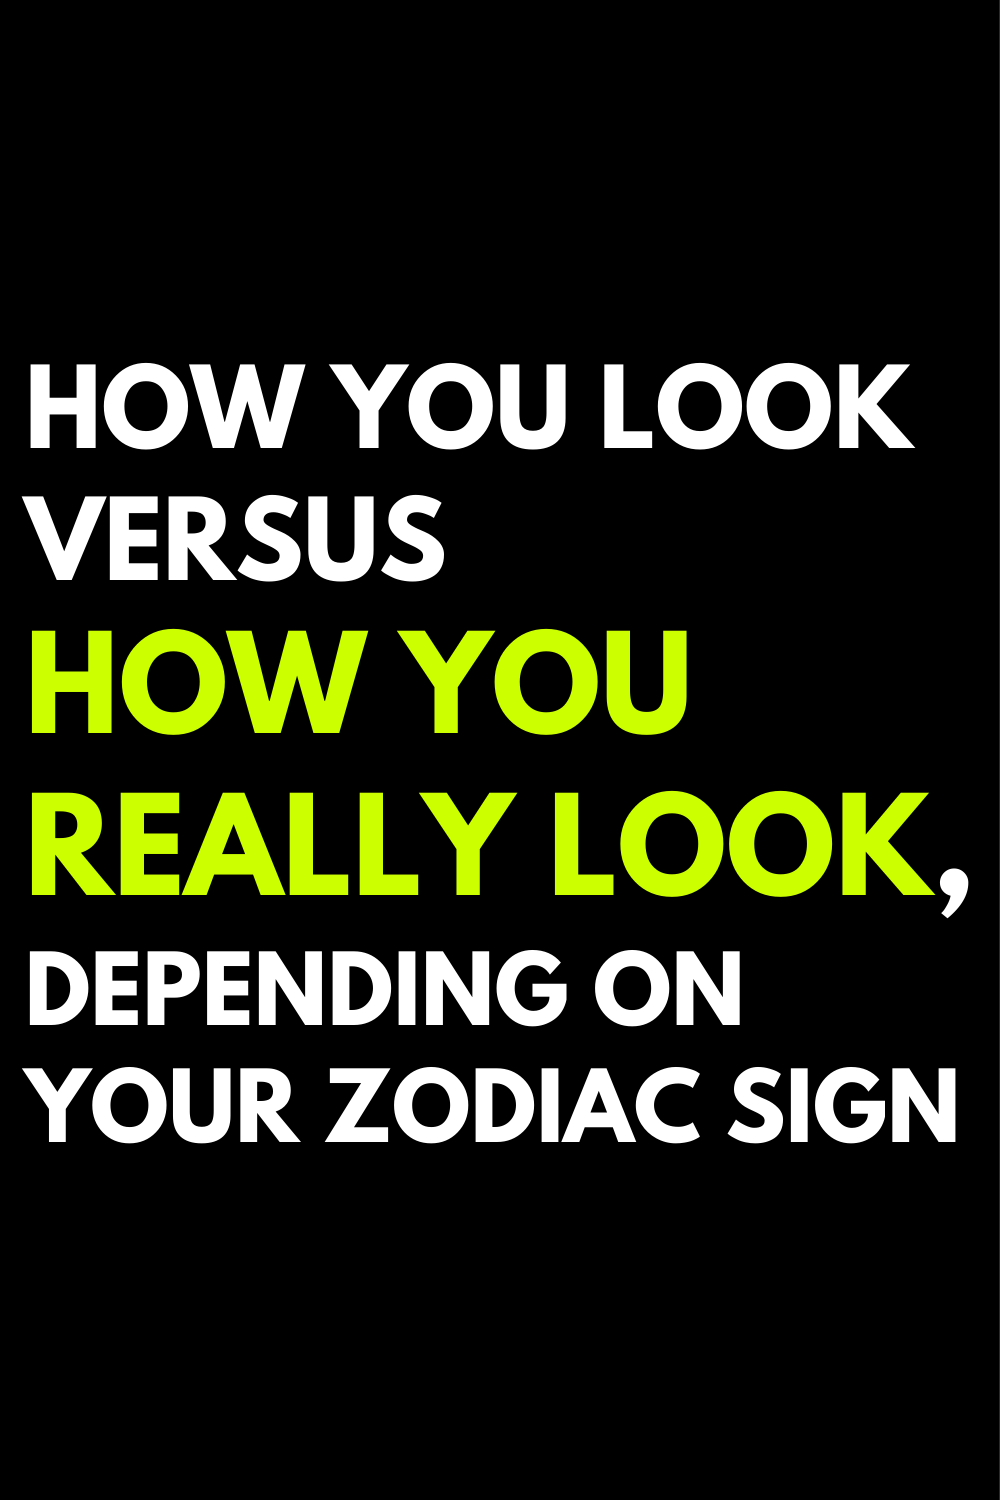 How you look versus how you really look, depending on your zodiac sign